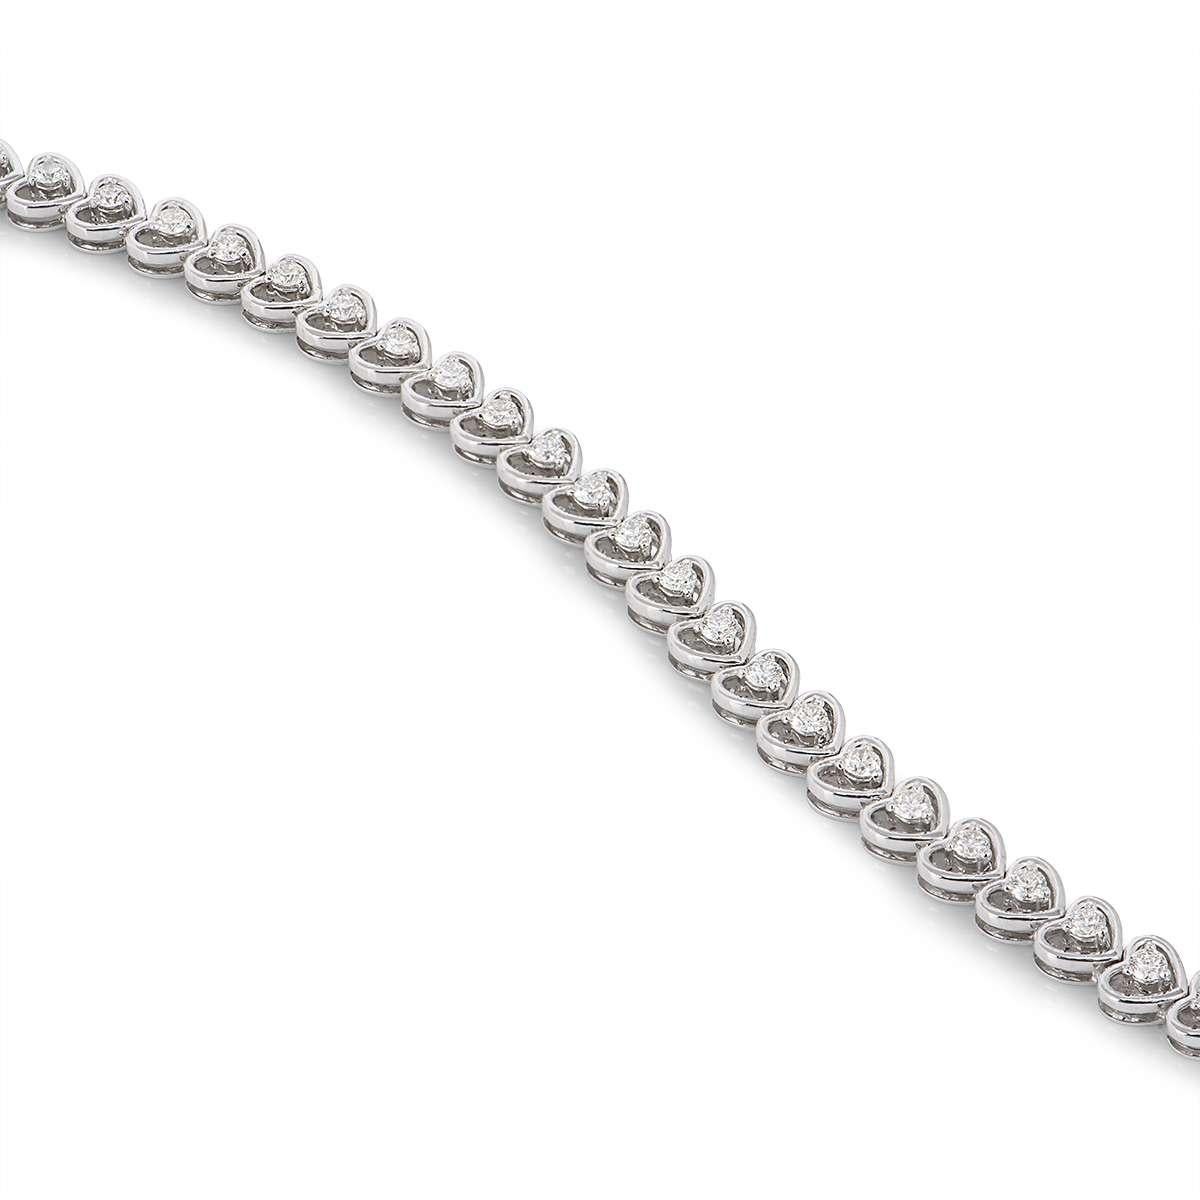 A beautiful 18k white gold diamond line bracelet. The bracelet comprises of 35 cut out hearts with round brilliant cut diamonds set in the centre of each. The diamonds come to a total weight of 1.97ct, G-H colour VS clarity. The bracelet features a